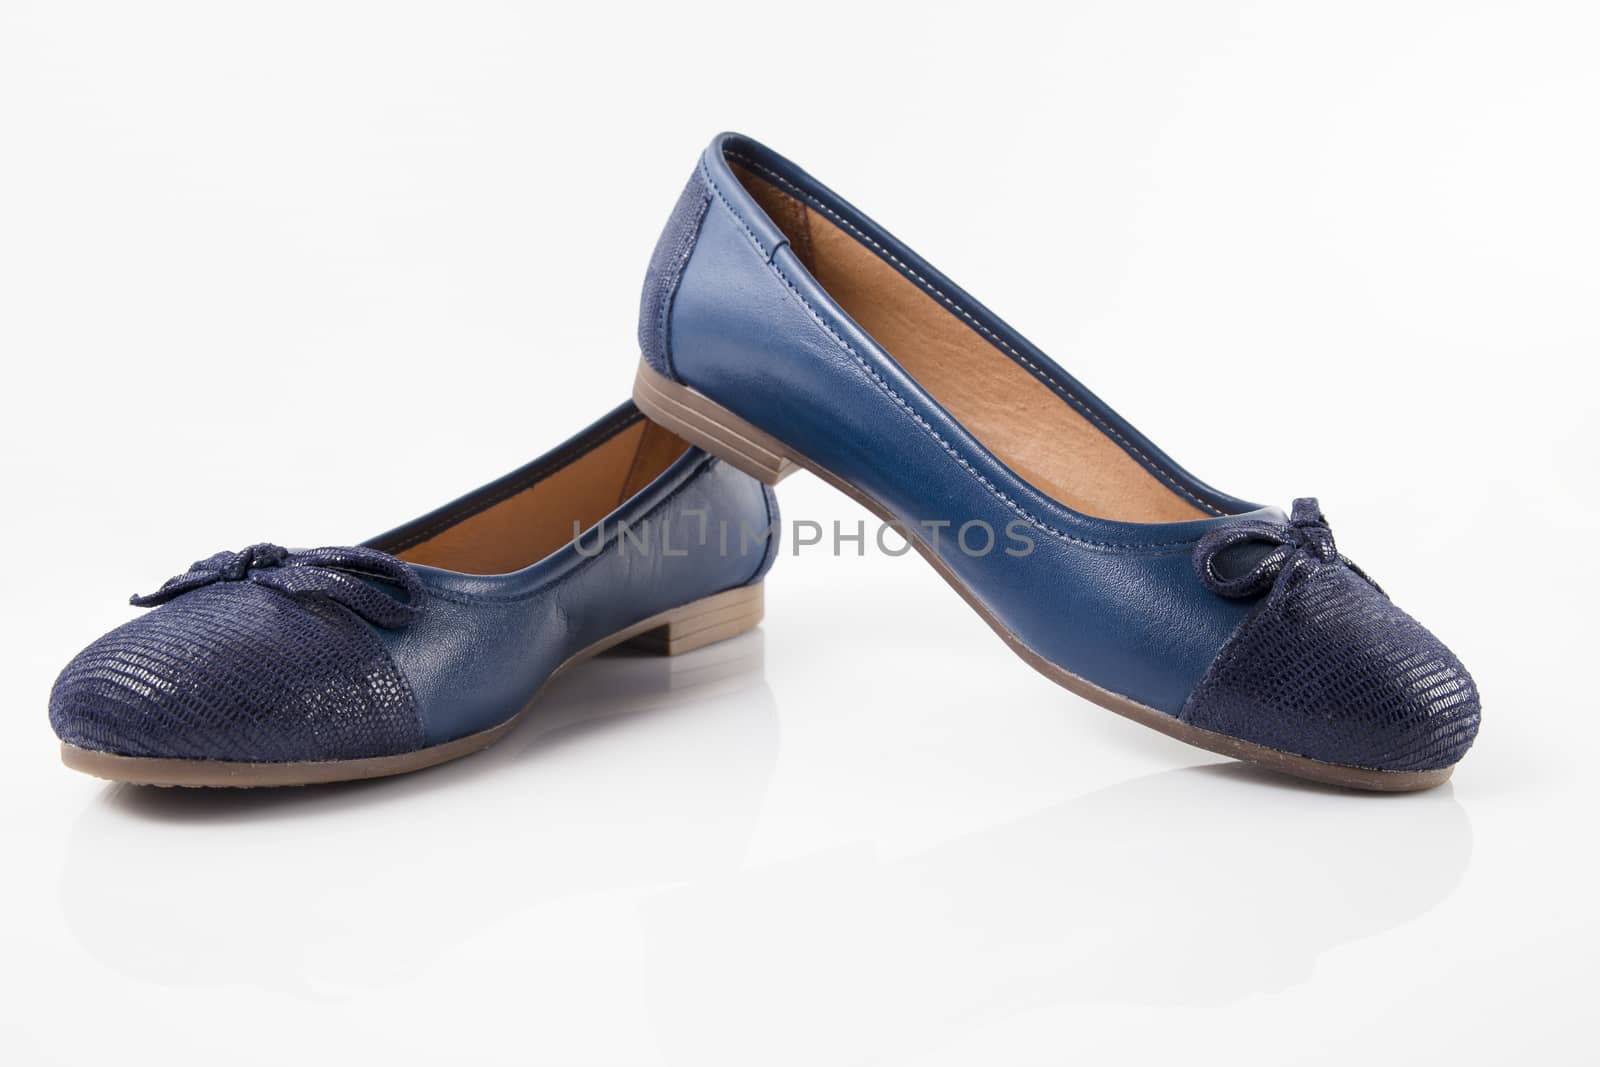 Pair of blue leather shoes on white background, isolated product, top view.